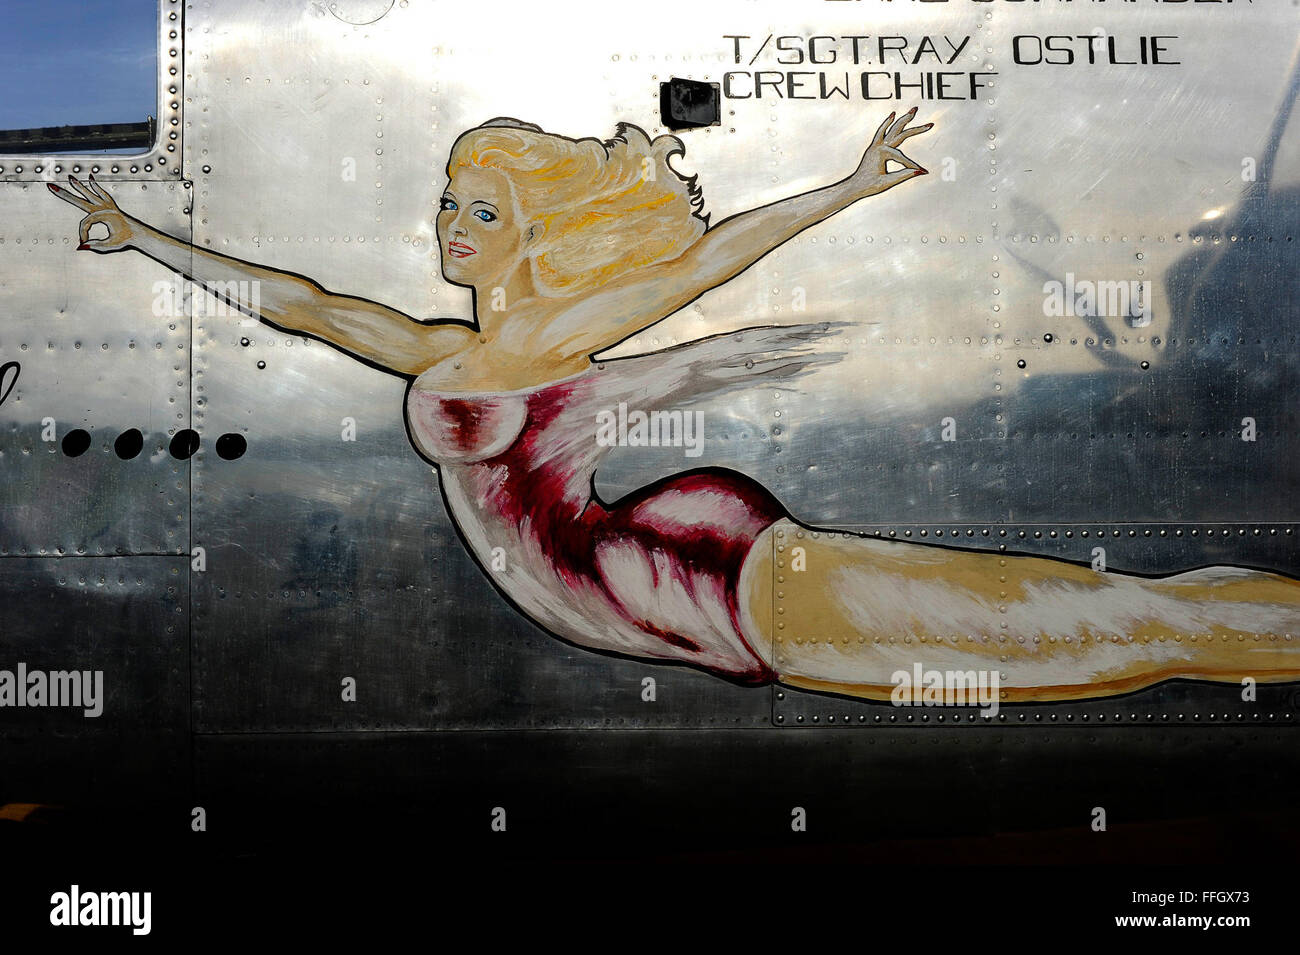 The nose art of the MIss MItchell, an original Doolittle Tokyo Raiders B-25 Mitchell bomber, was featured at the 70th reunion of the Raiders at Wright-Patterson Air Force Base, Ohio. Miss Mitchell was restored over the course of 12 years by the Commemorative Air Force, whose mission is to maintain and preserve historic warbirds in flyable condition to tell the story of our American heroes. Stock Photo